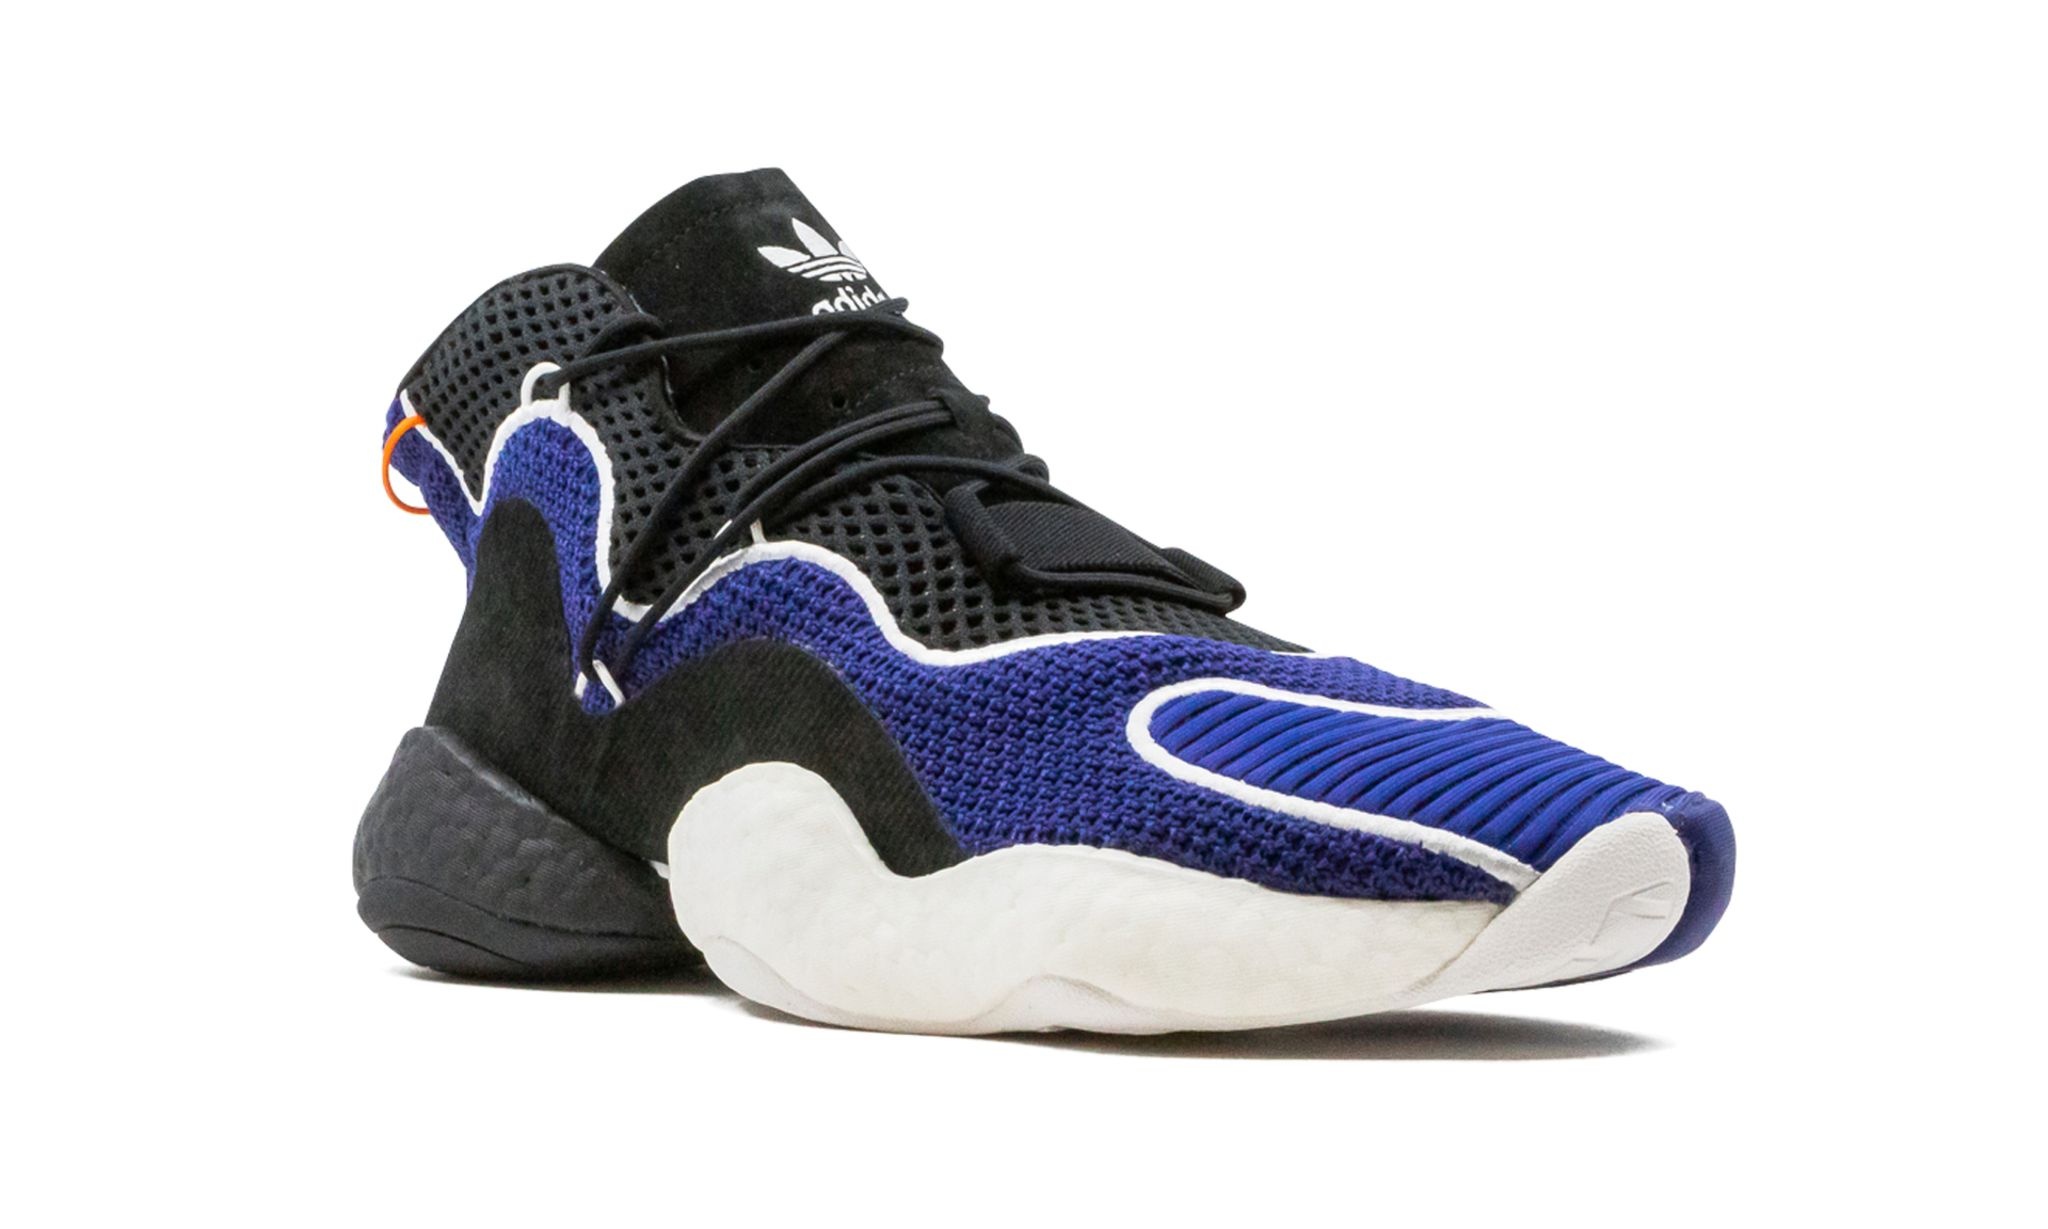 Crazy BYW   "747 Warehouse Exclusive" - 6